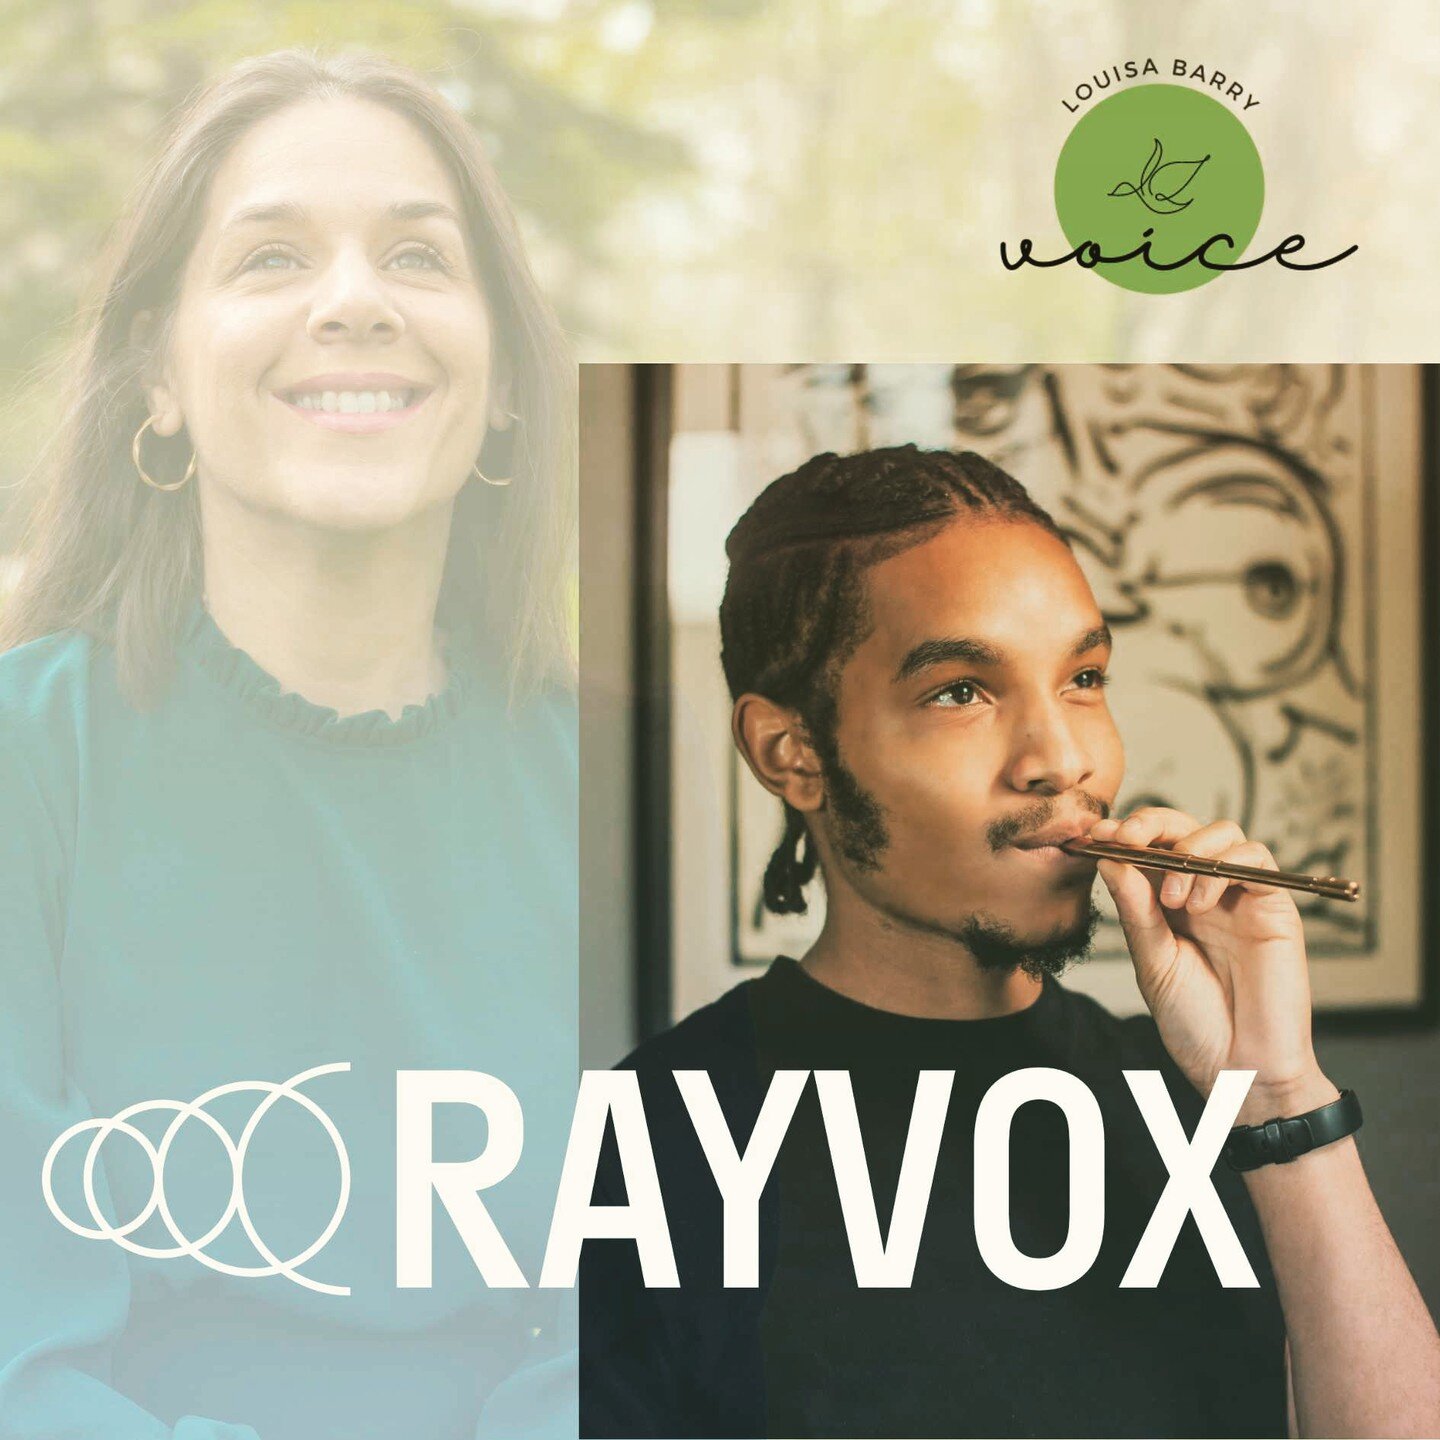 🎉 Hey there, lovely singers! I've got some awesome news to share with you! 🎤 I have teamed up with the fantastic Rayvox to bring some extra musical magic into your lives! 🎶

💫 We're all about supporting your vocal journey, and these innovative Ra